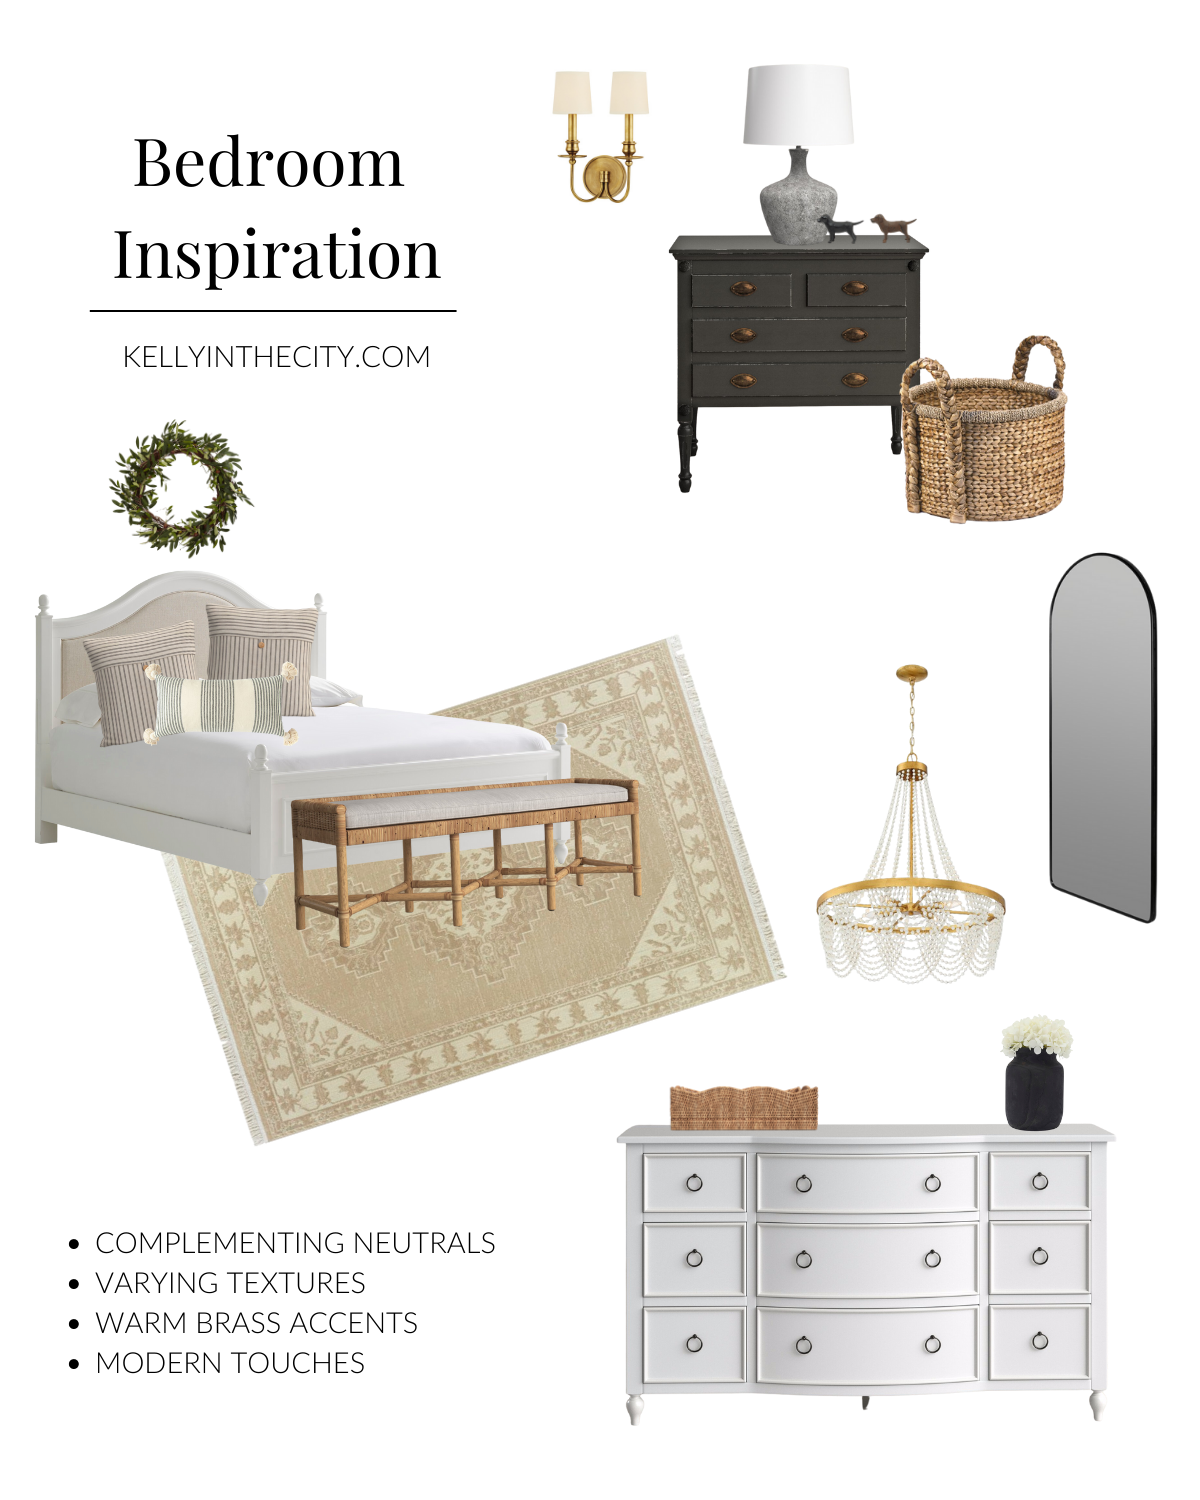 Birch Lane Sale of the Year bedroom inspiration